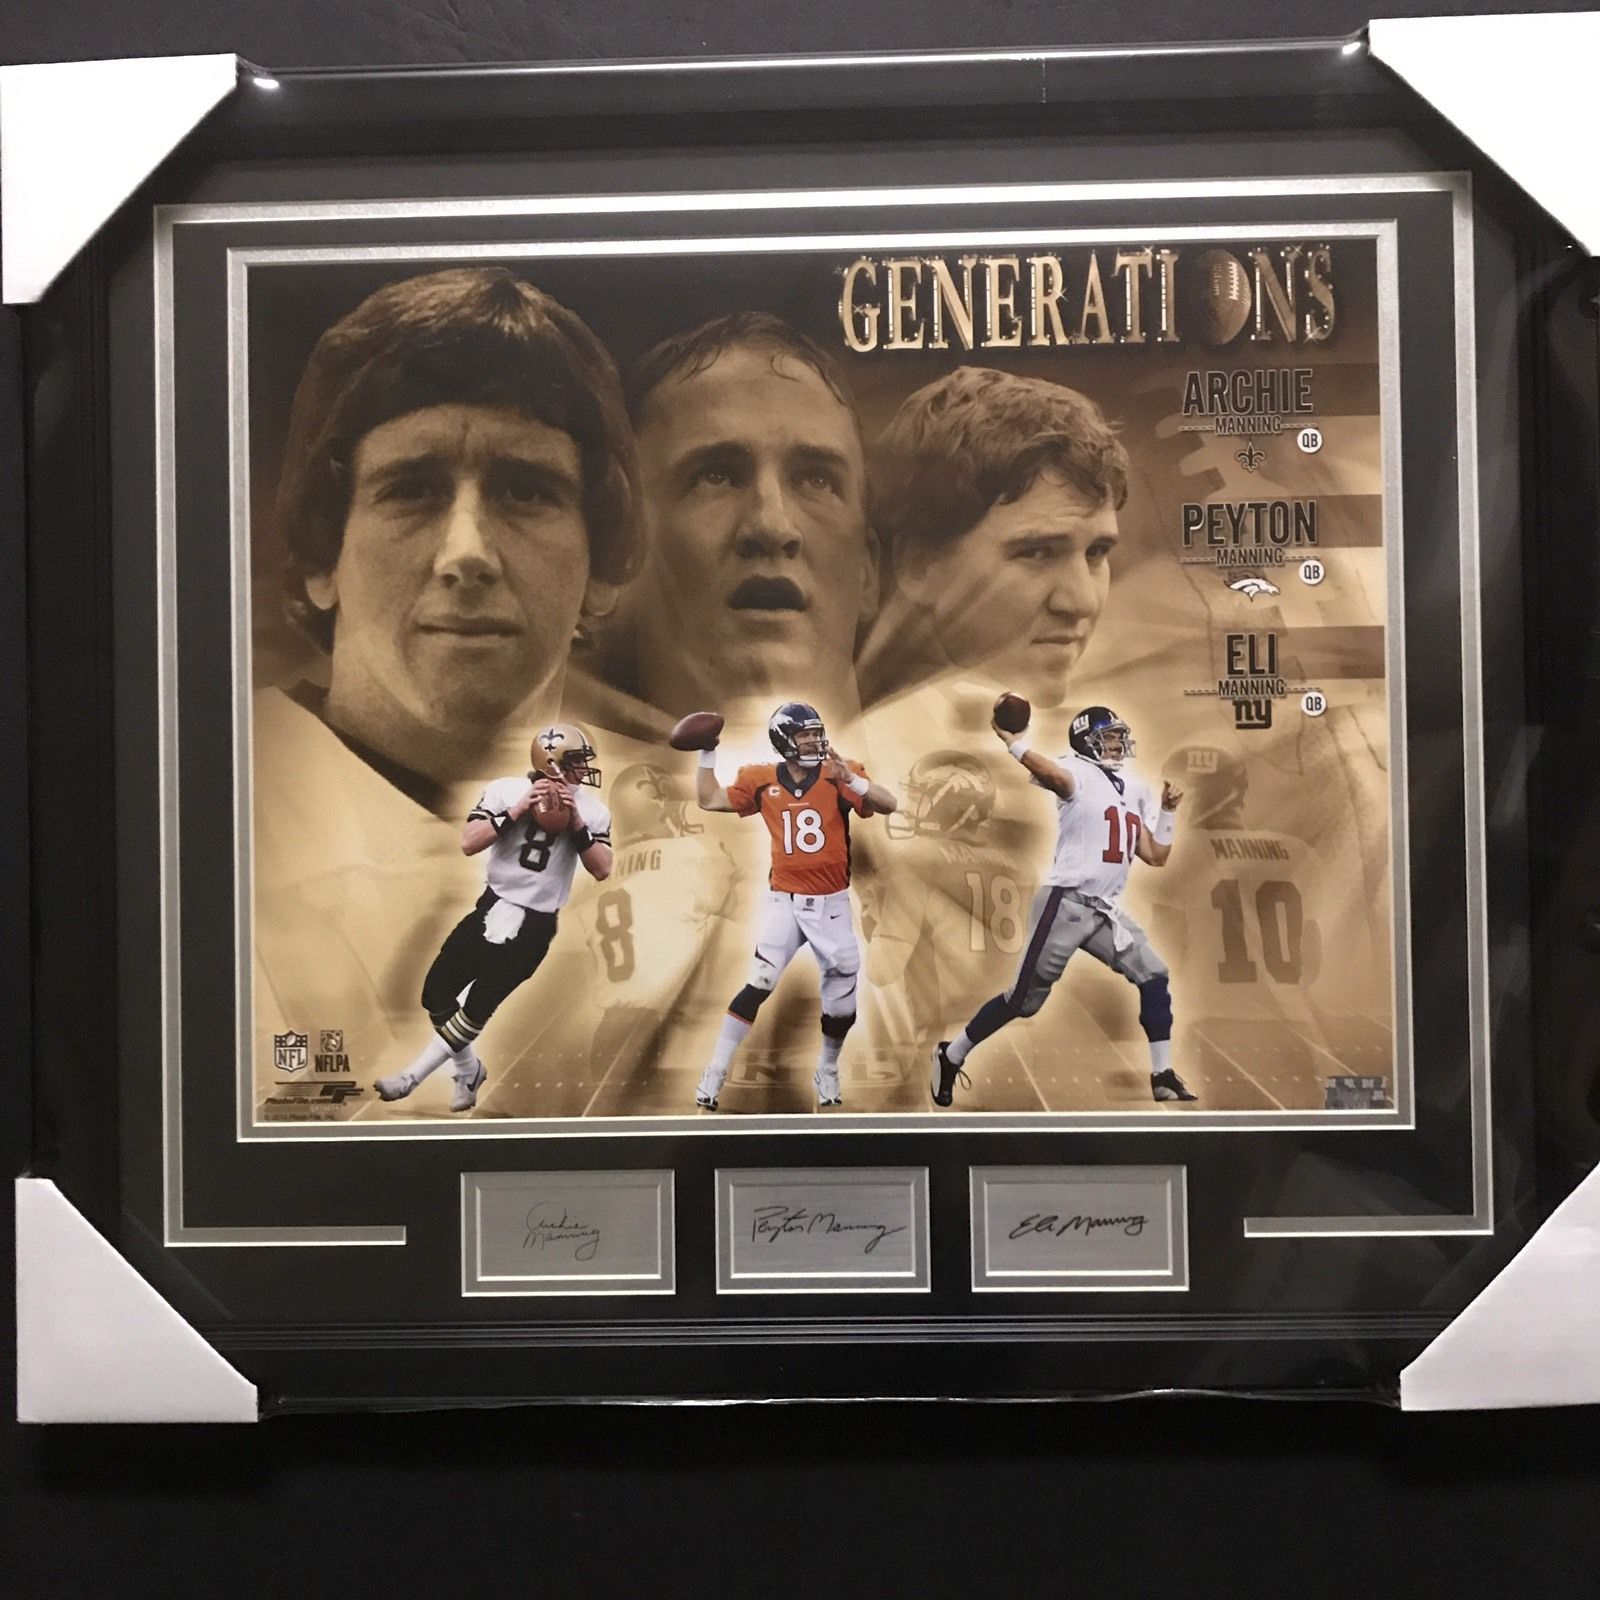 FRAMED Laser Engraved Autograph PEYTON ELI ARCHIE & MANNING Family 16x20 Photo